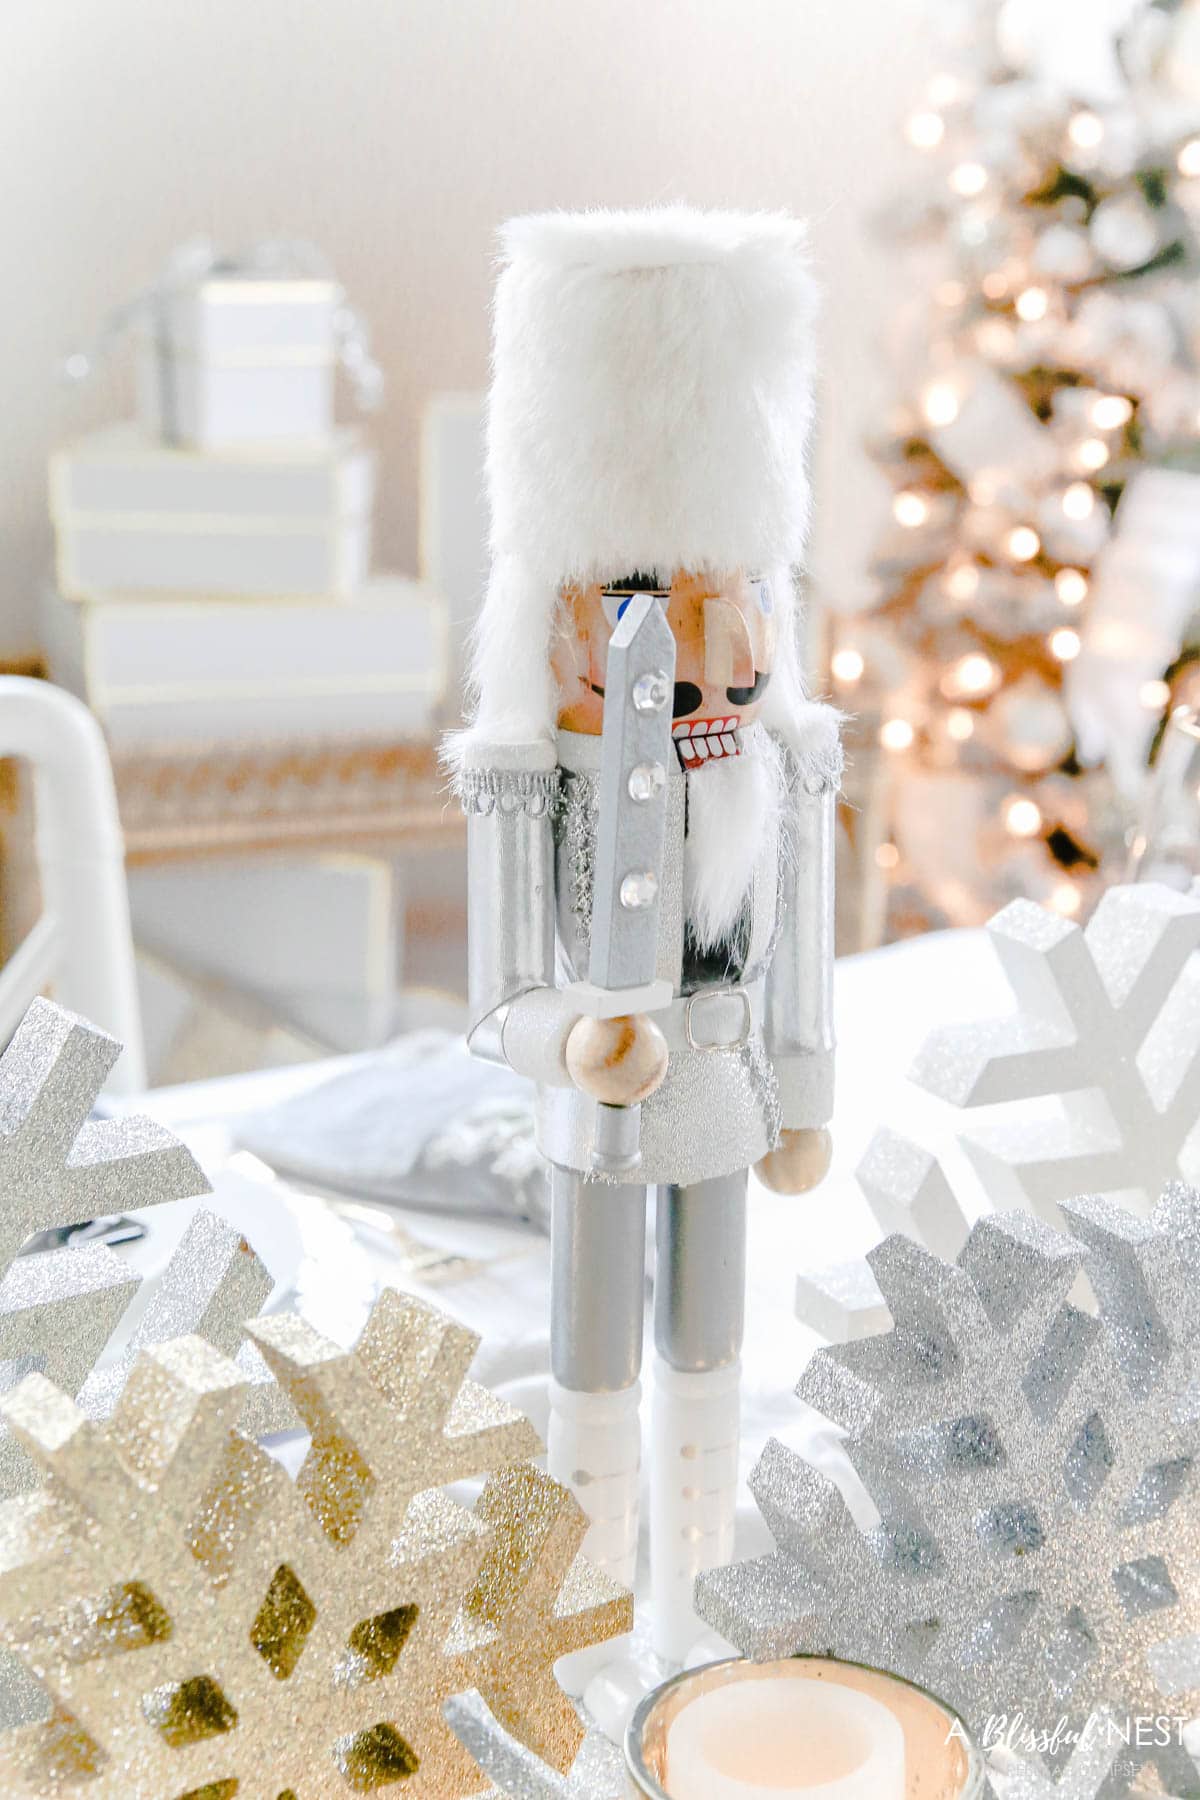 Silver glitter nutcracker used in the center of this holiday table